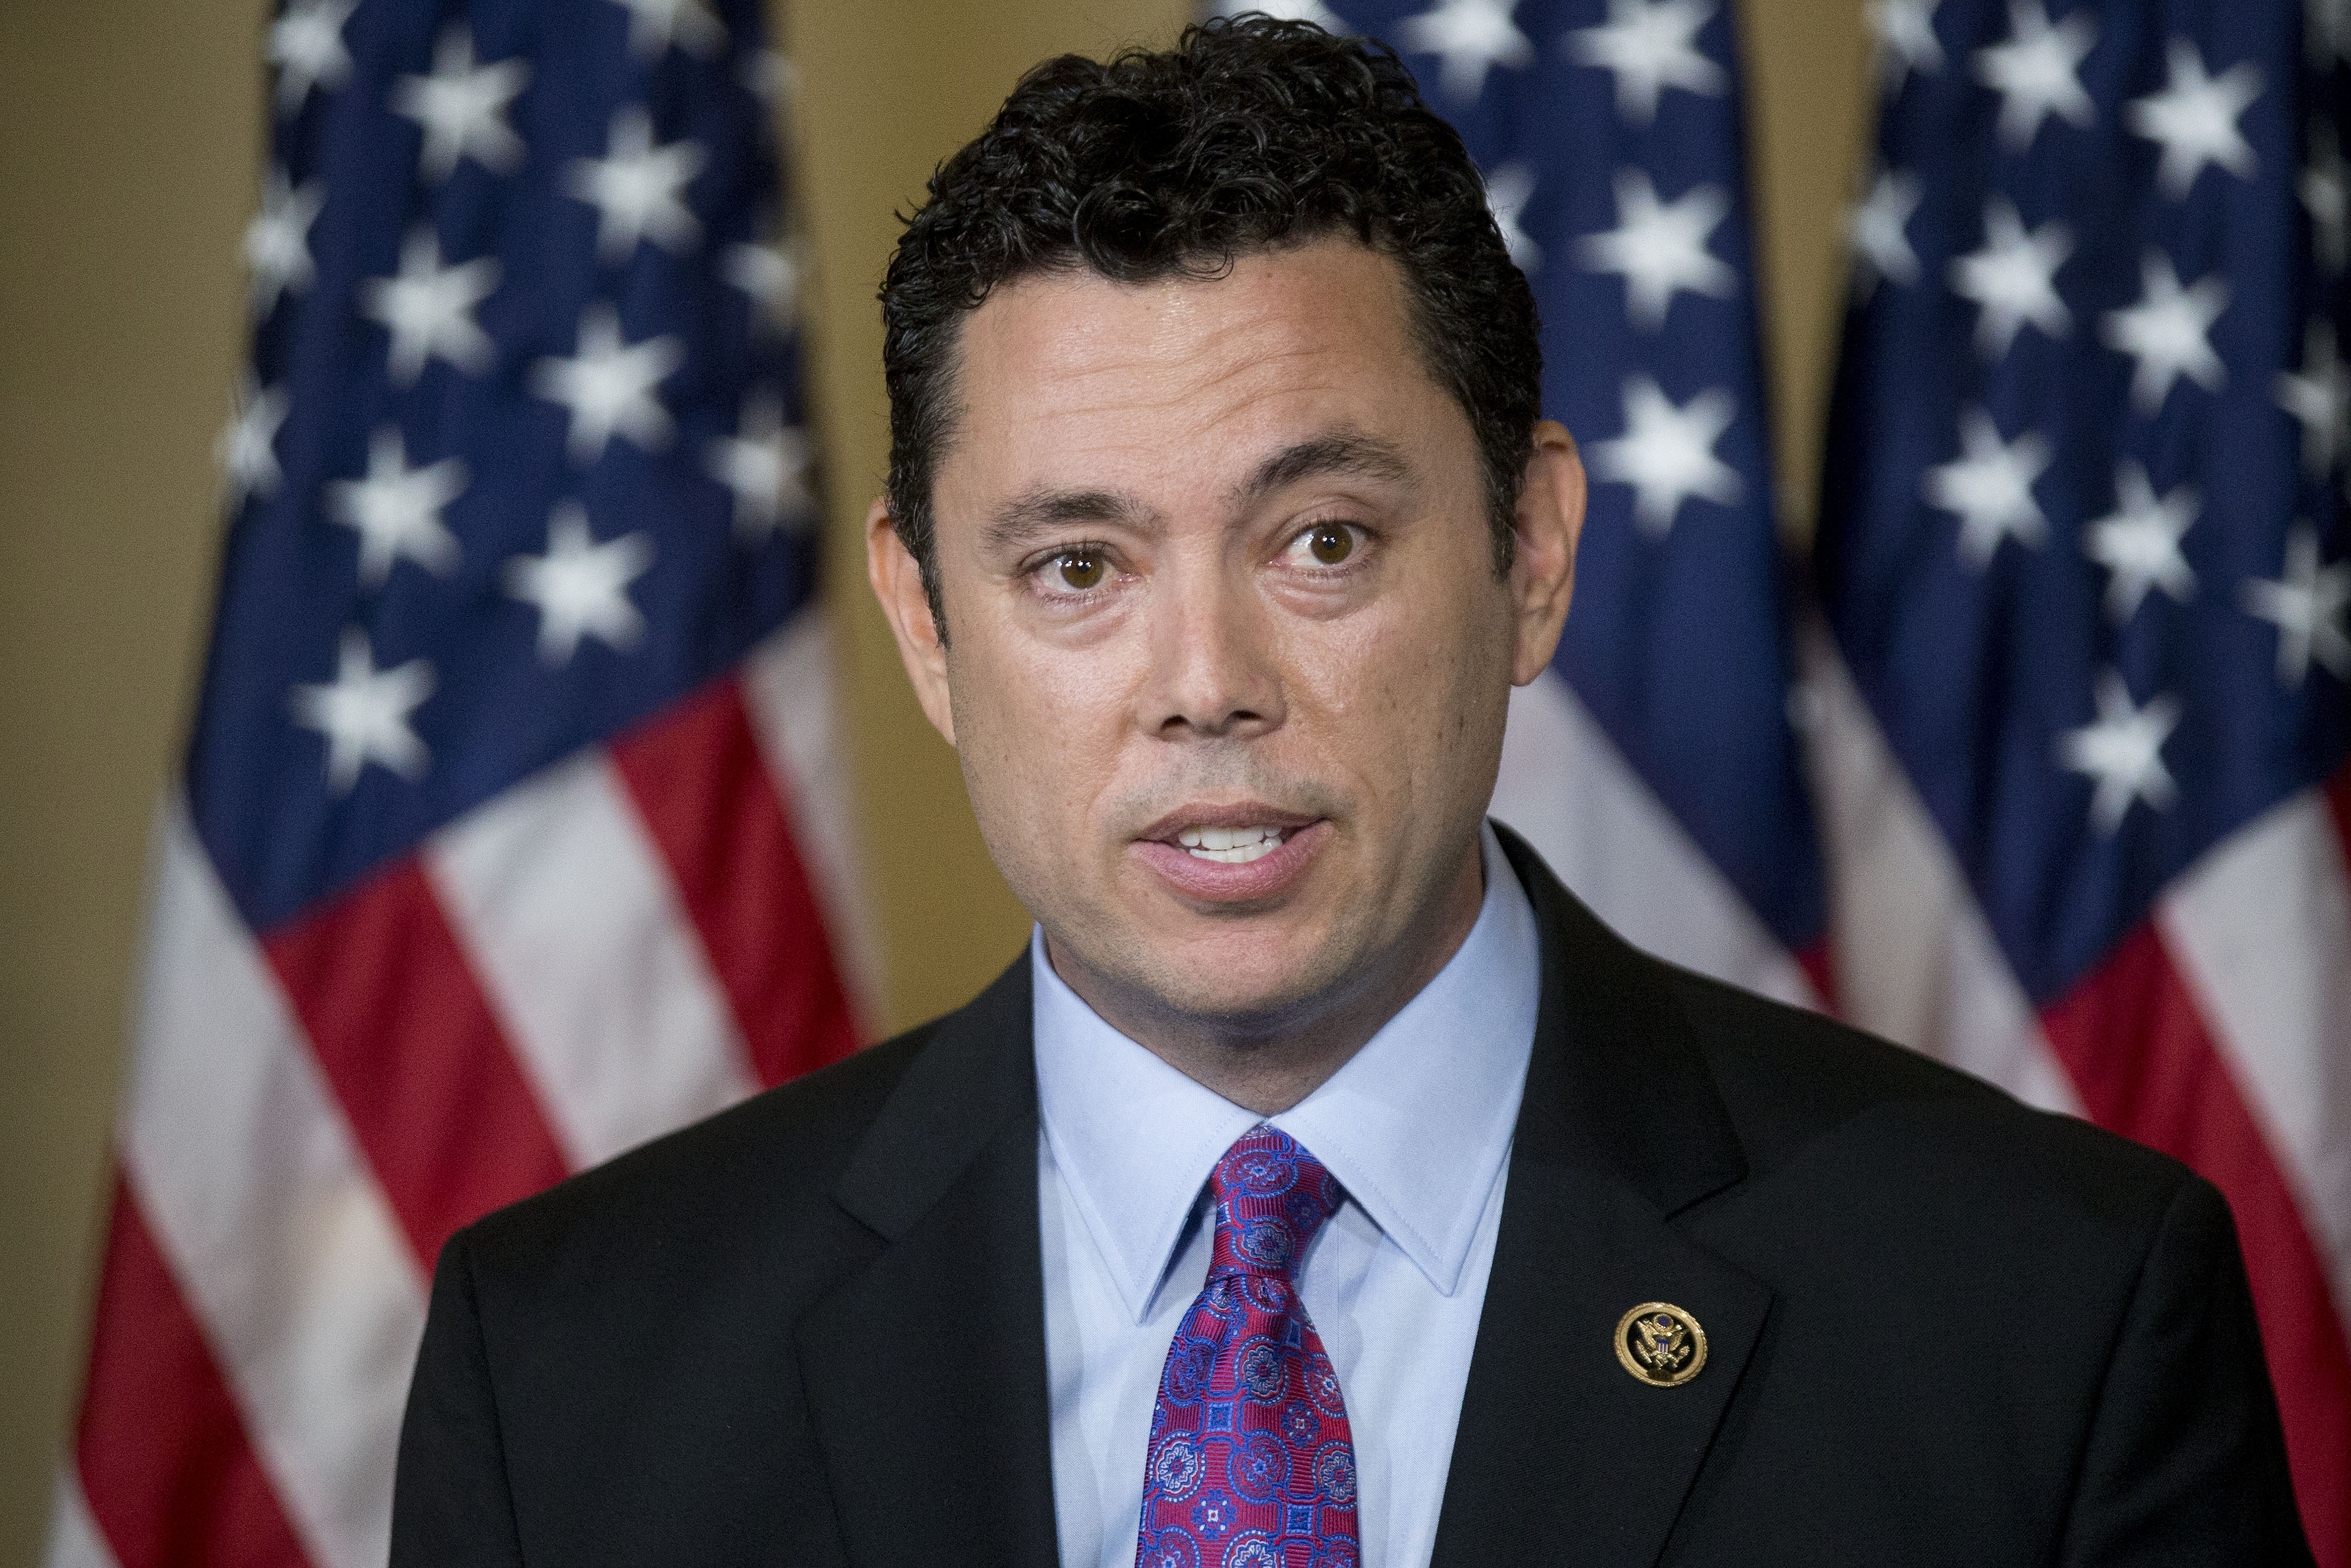 Representative Jason Chaffetz, a Republican from Utah, speaks to members of the media after a closed House Republican election meeting on Capitol Hill in Washington, D.C., U.S., on Thursday, Oct. 8, 2015. (Andrew Harrer—Bloomberg/Getty Images)